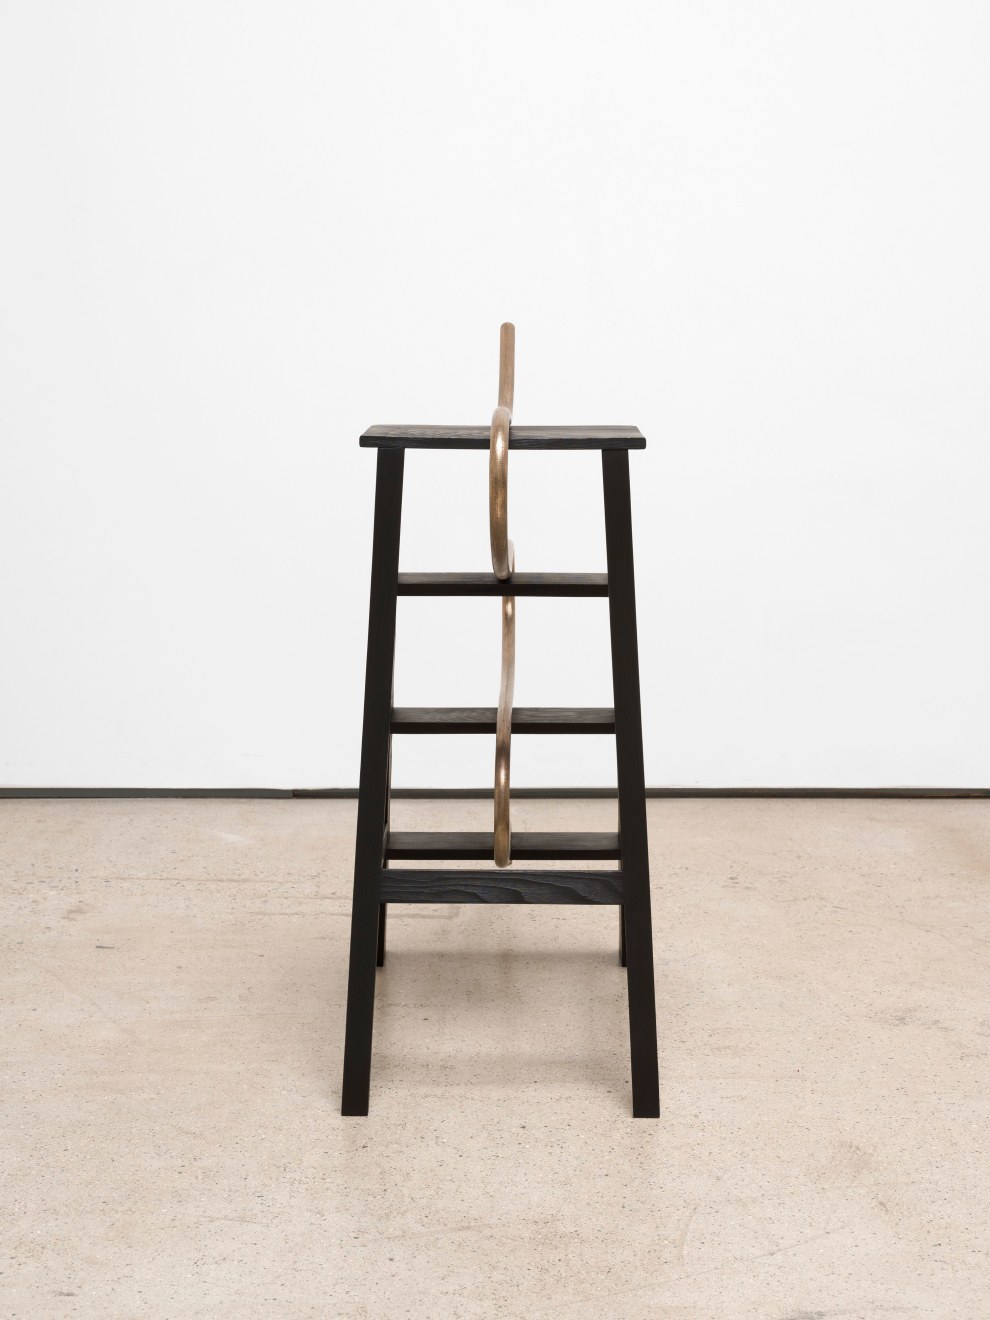 Ricky Swallow Step Ladder with Cane (cursive), 2020